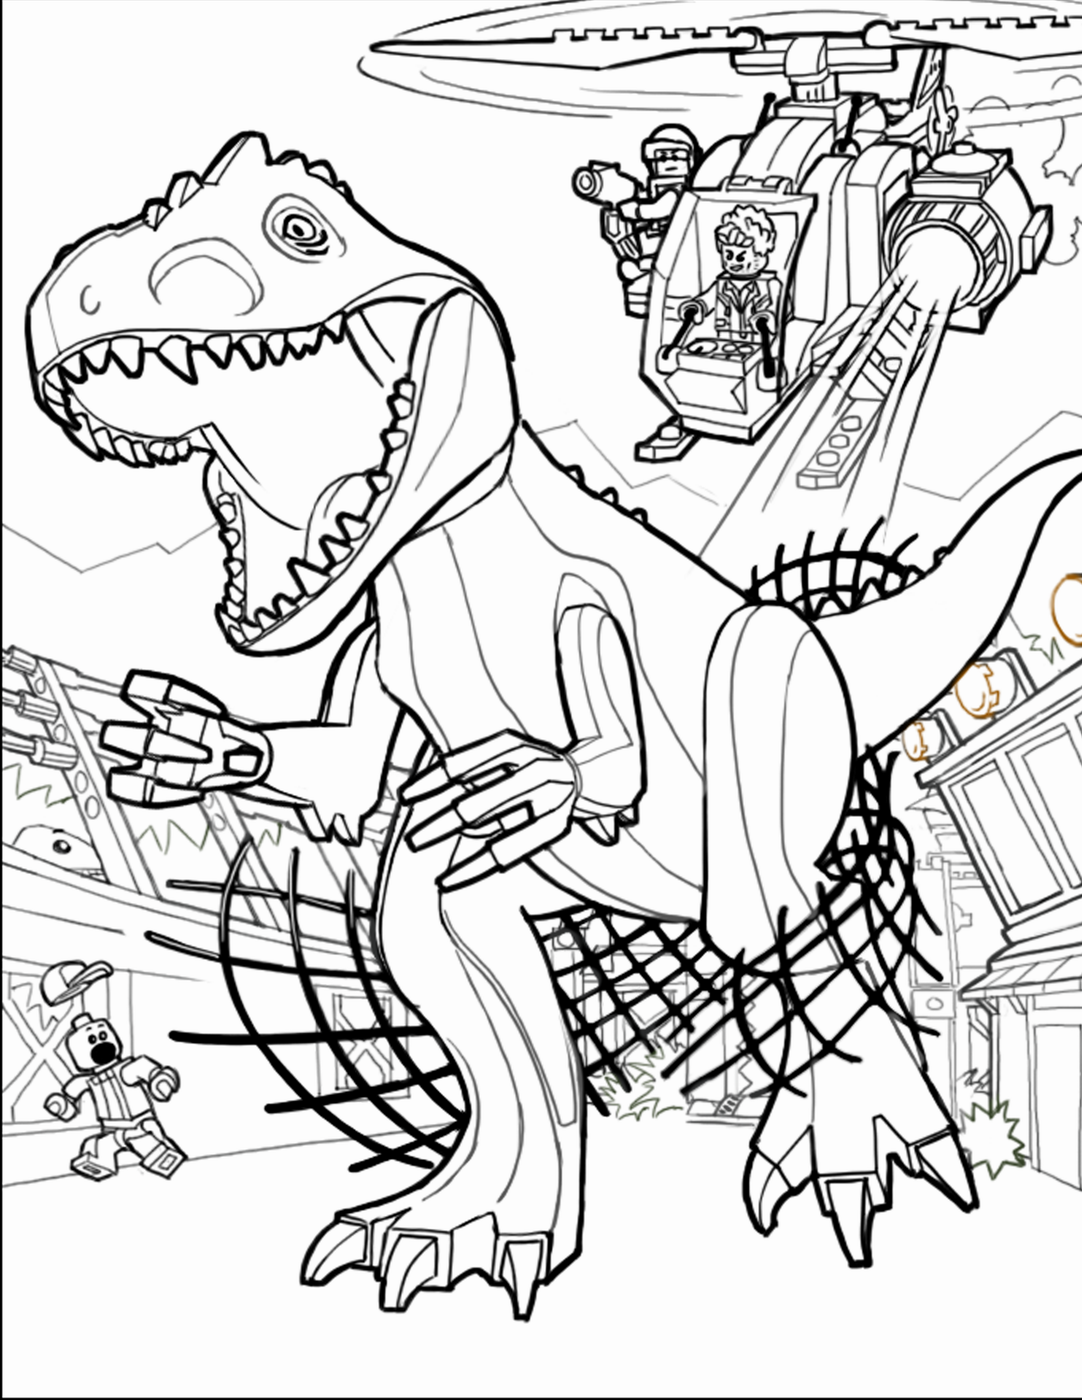 Jurassic World Coloring Pages from Jurassic World